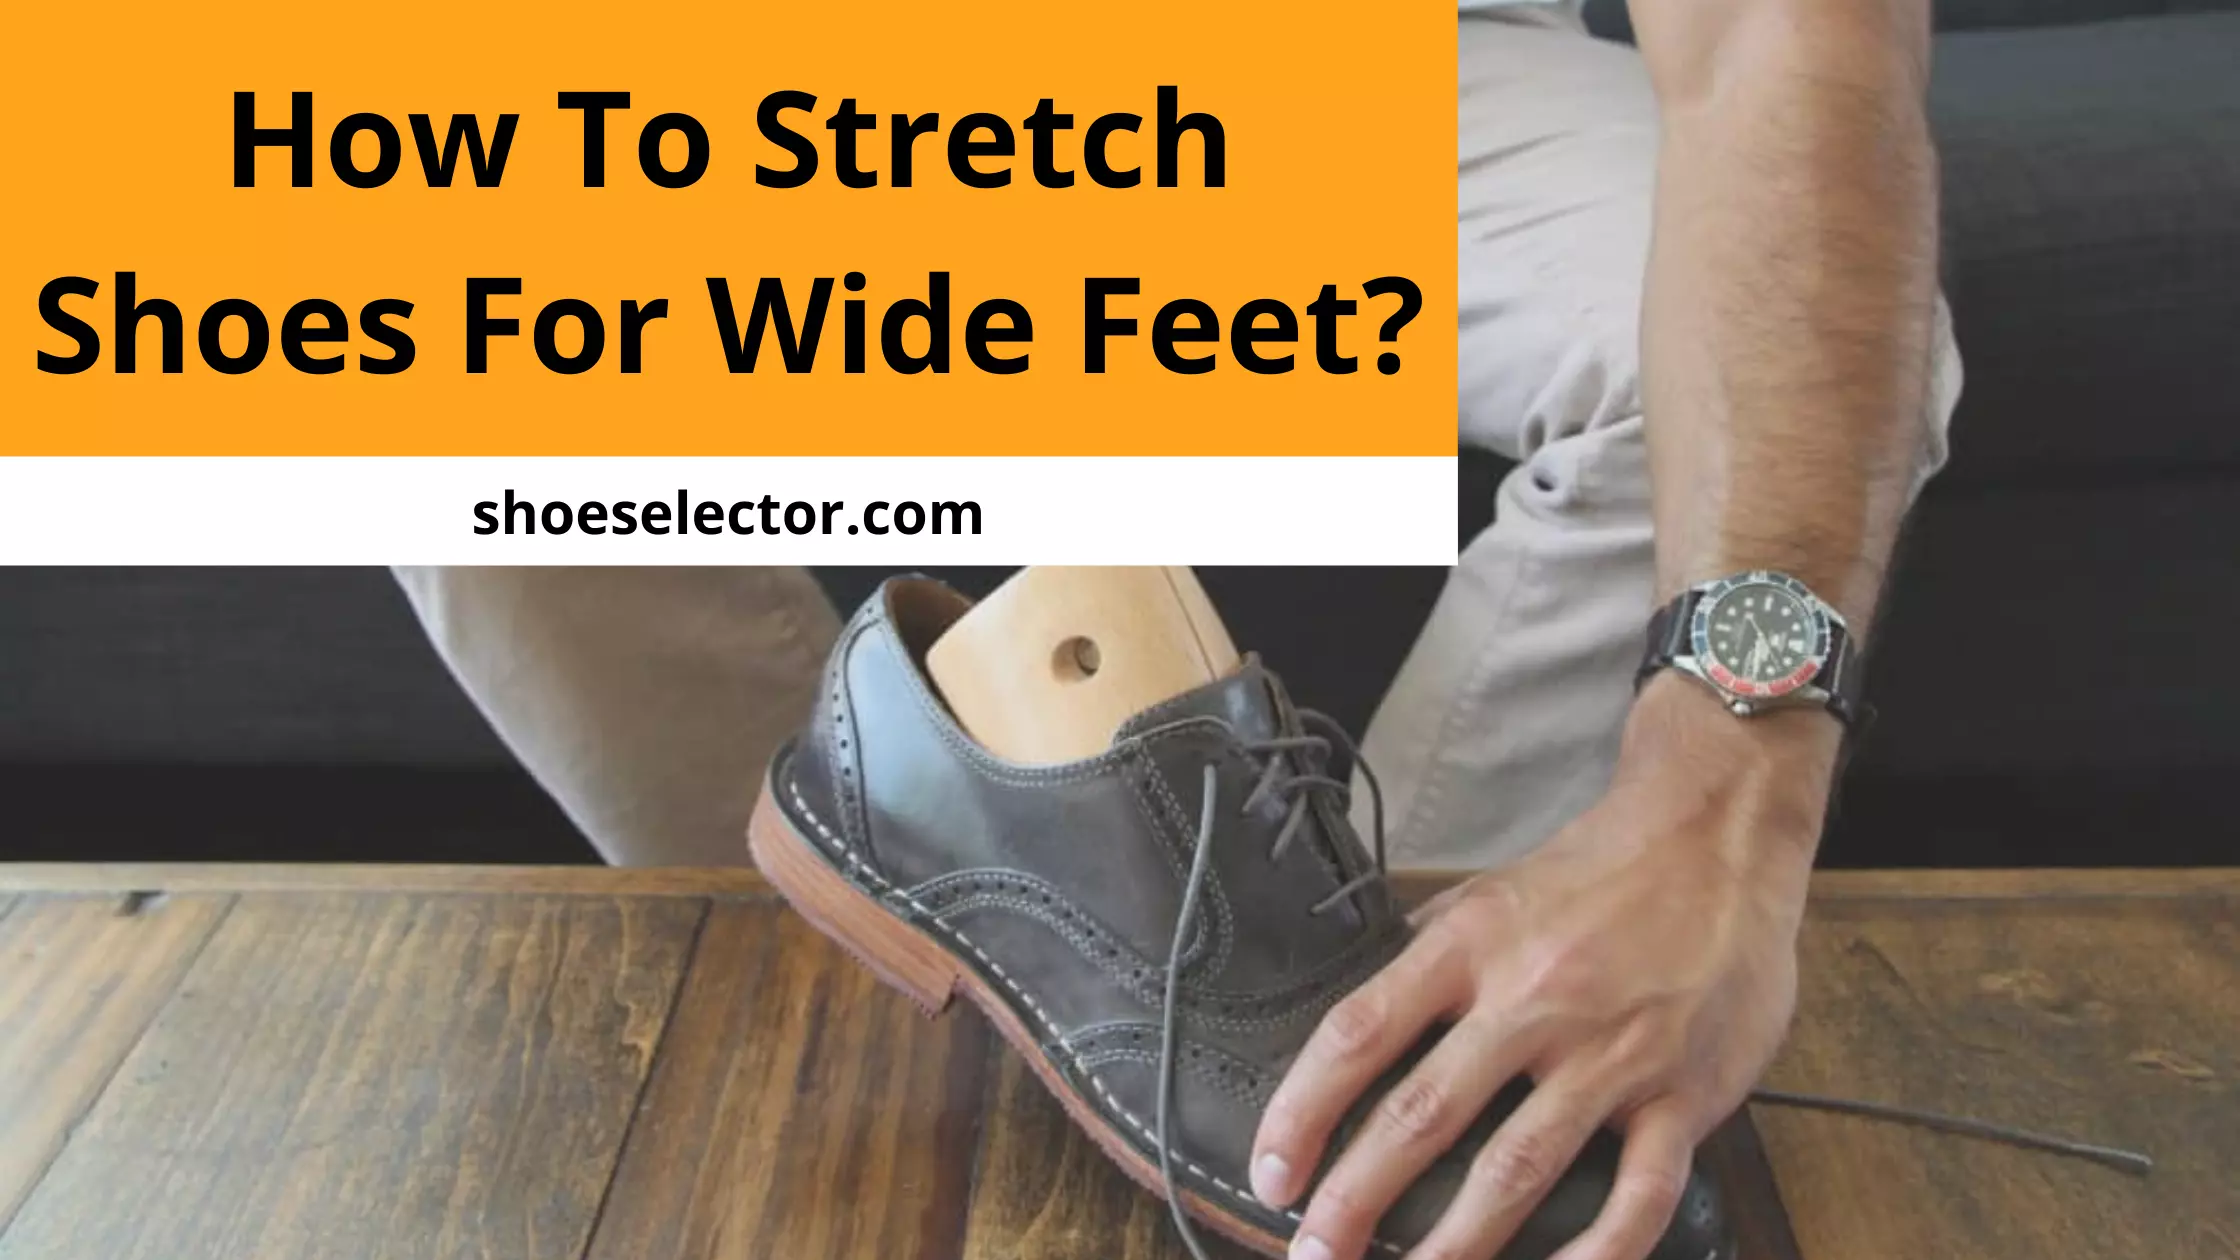 How To Stretch Shoes For Wide Feet? - Pro Guide